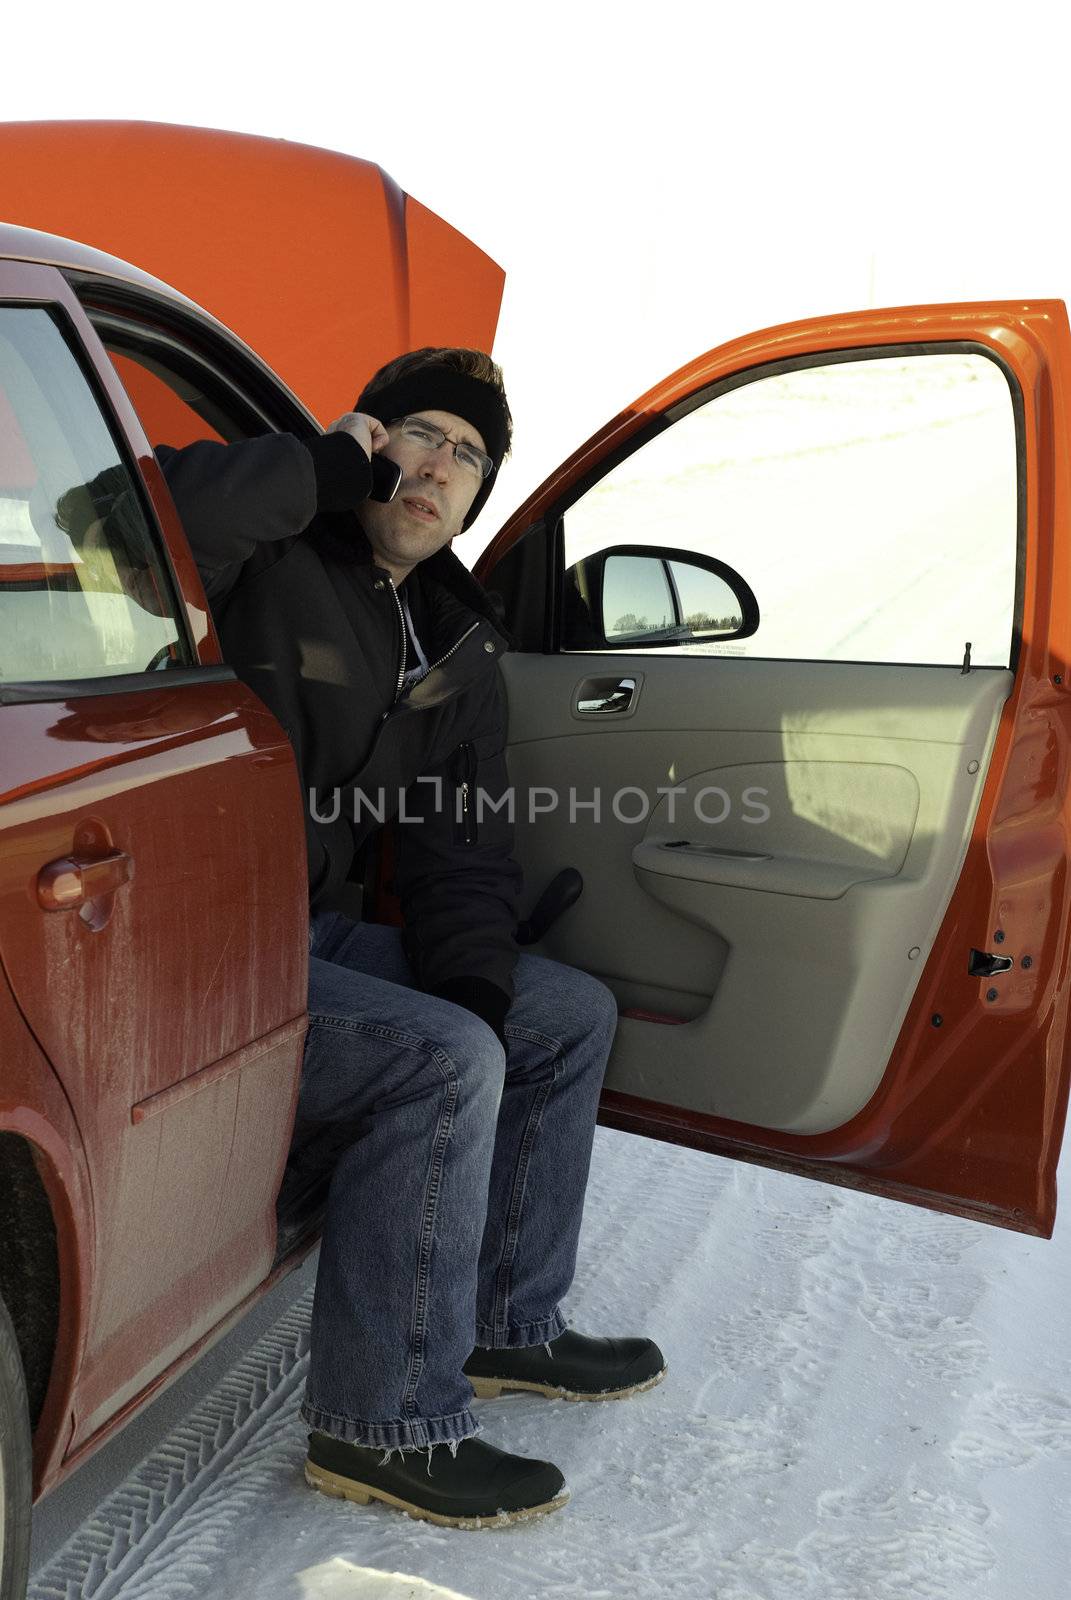 A young man using his cell phone to call for help while waiting in his car with the hood up.